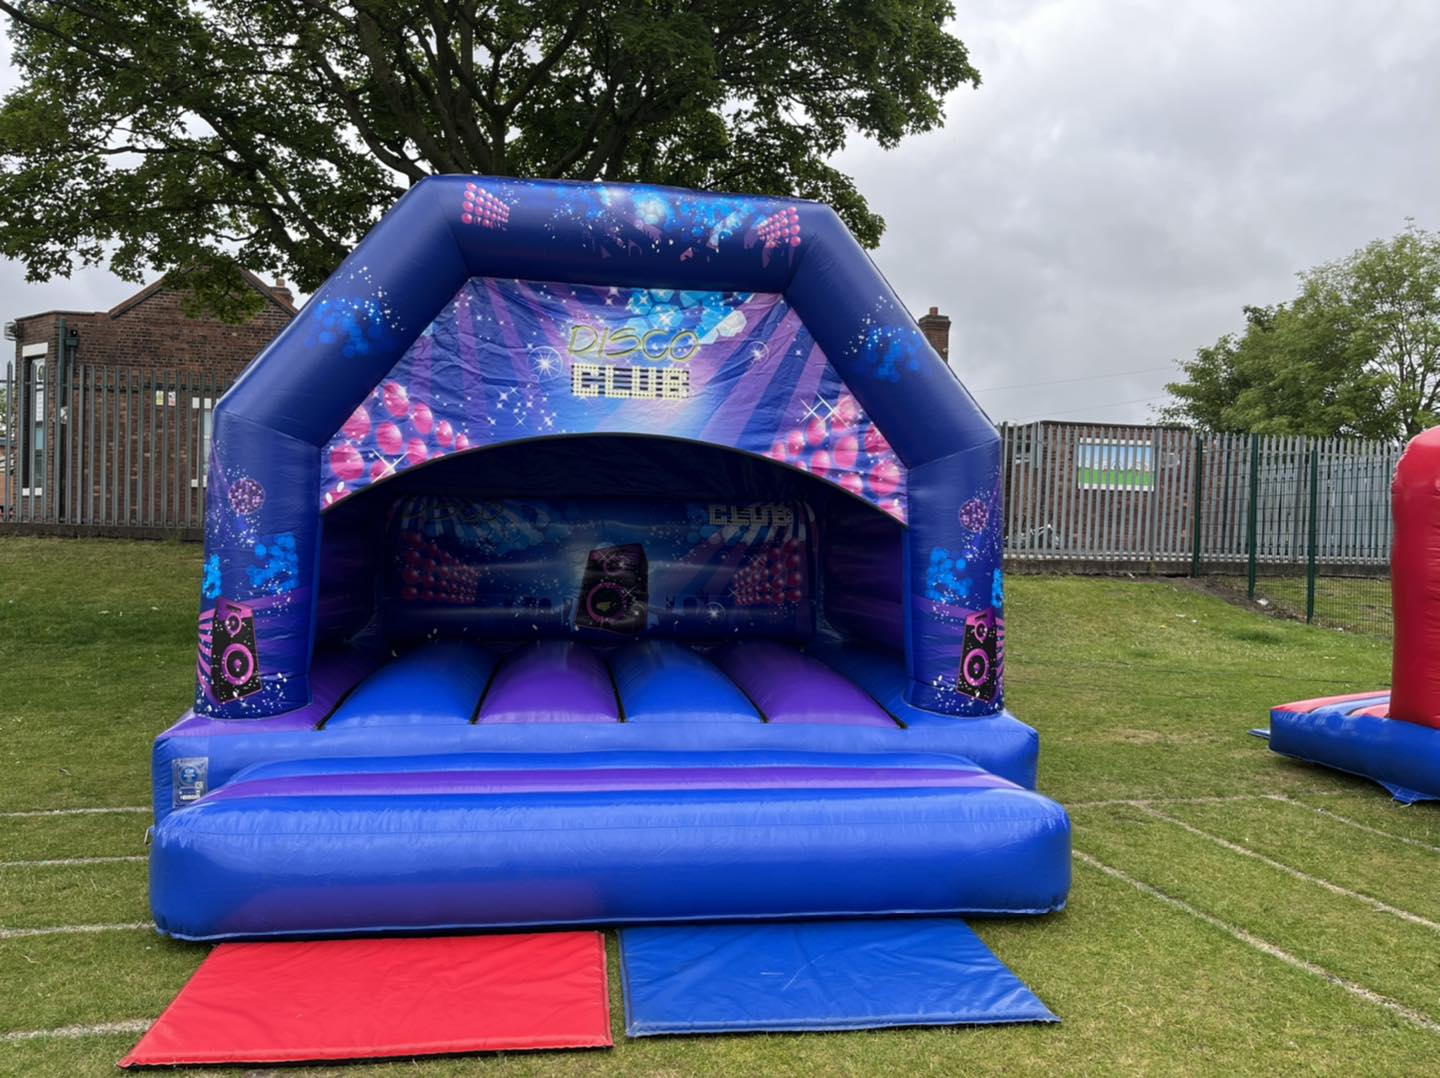 This image shows an SJ's Leisure disco bouncy castle inflatable on hire in the Warrington region. Available to book online through interactive booking software.